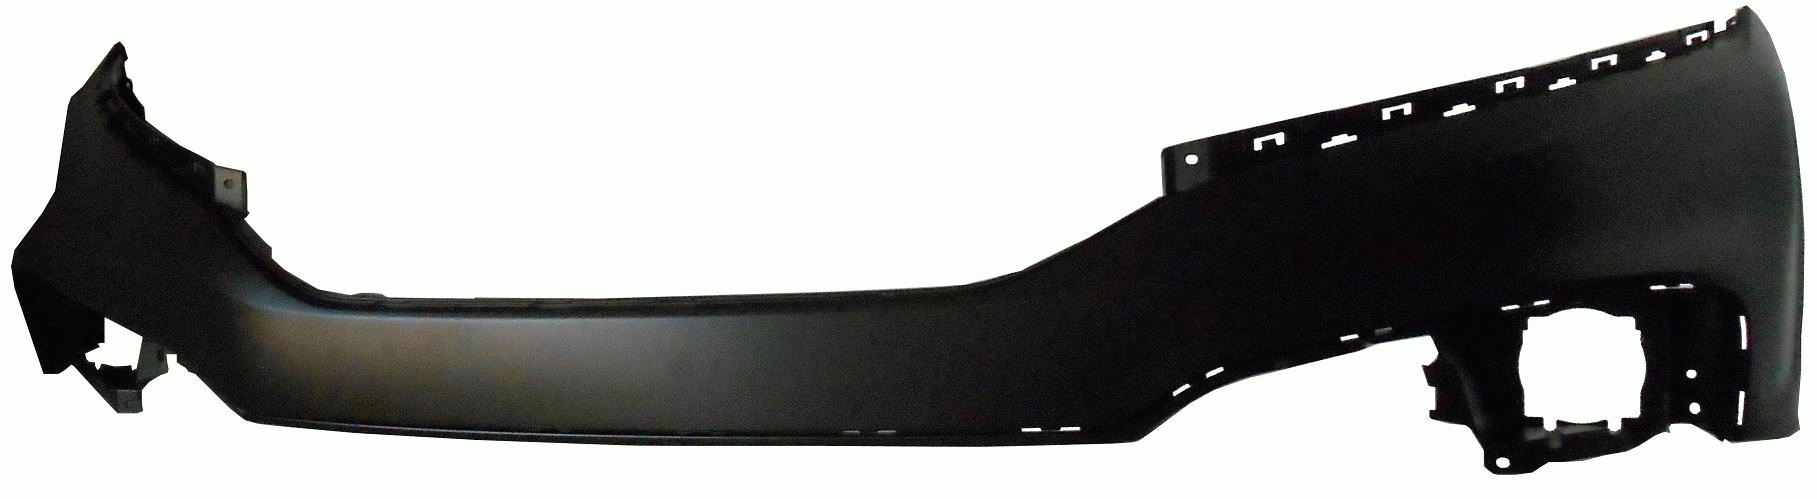 ACCORD CROSSTOUR 13-15 Front UPPER Cover Prime